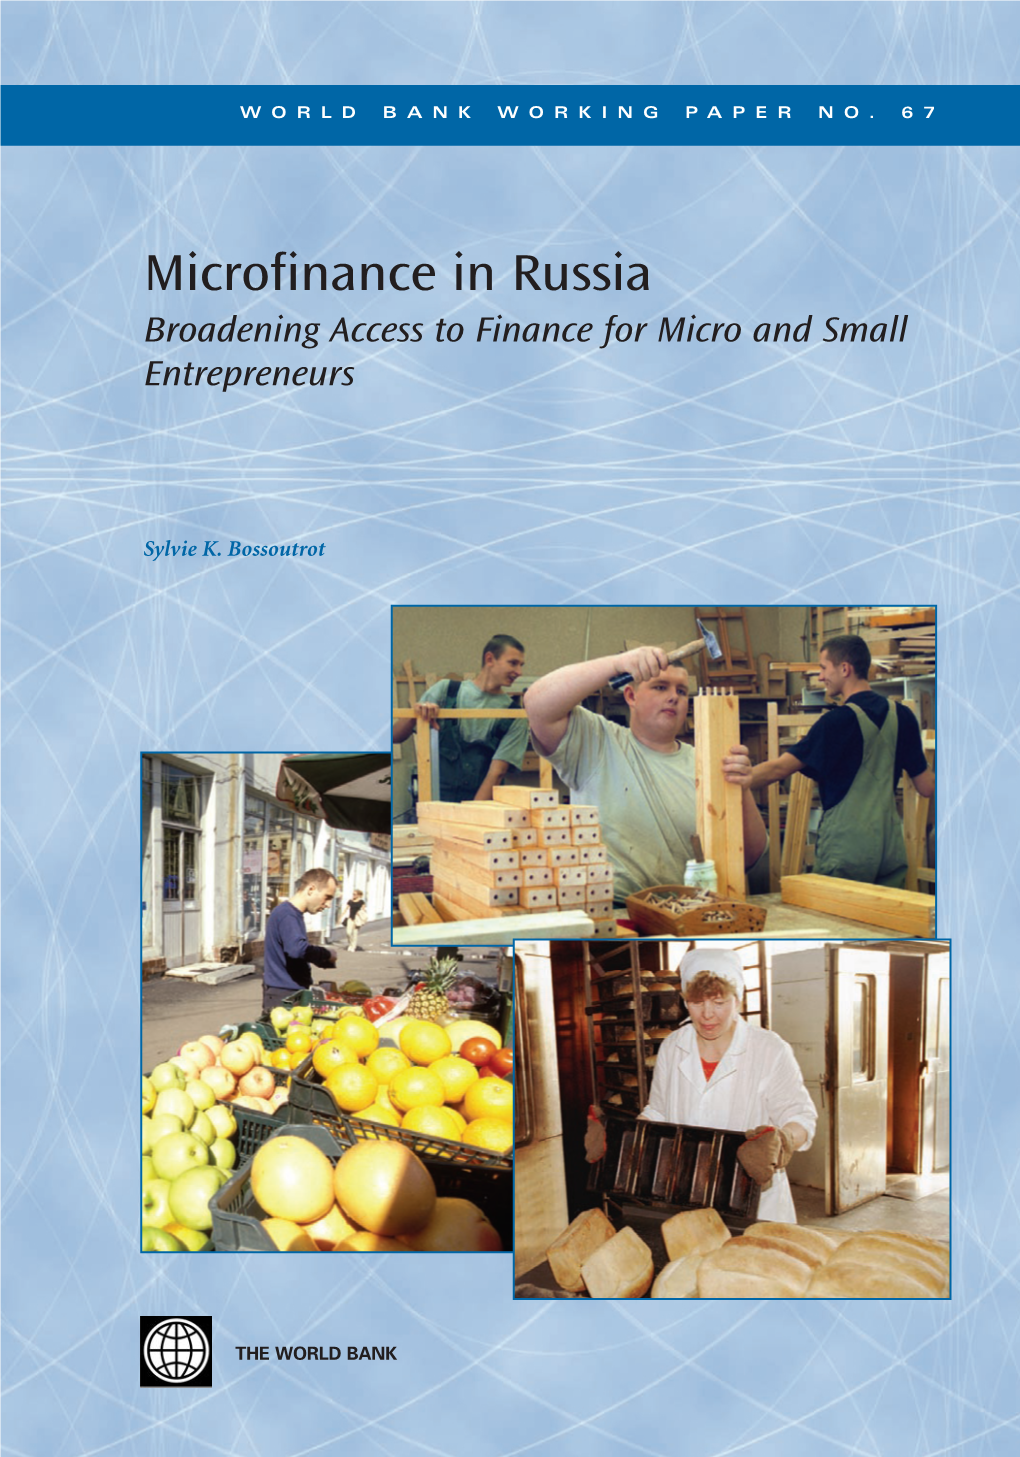 Microfinance in Russia Broadening Access to Finance for Micro and Small Entrepreneurs